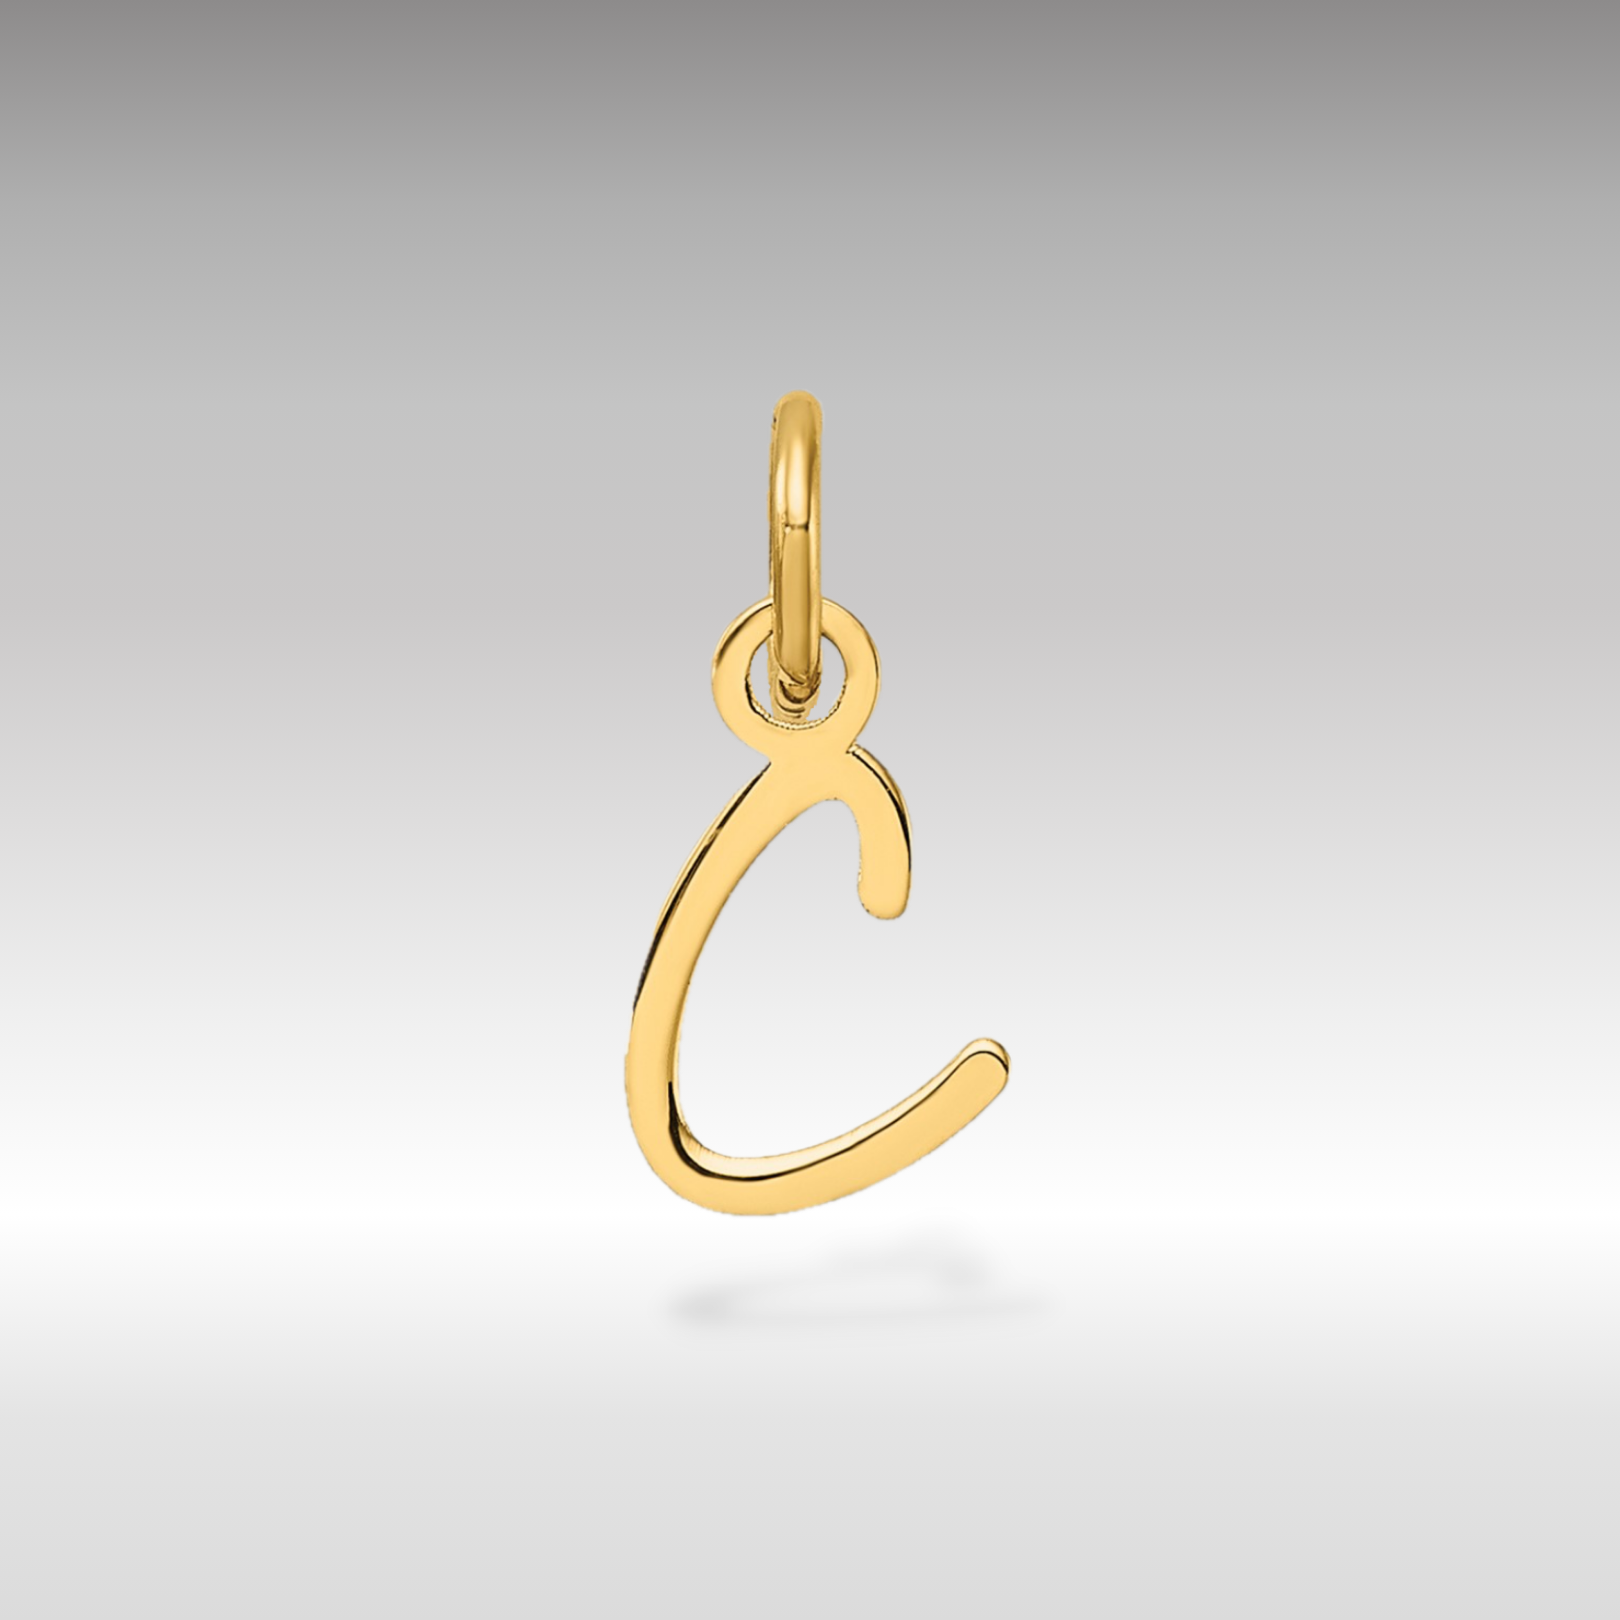 14K Gold Small Script Letter "C" Initial Pendant - Charlie & Co. Jewelry